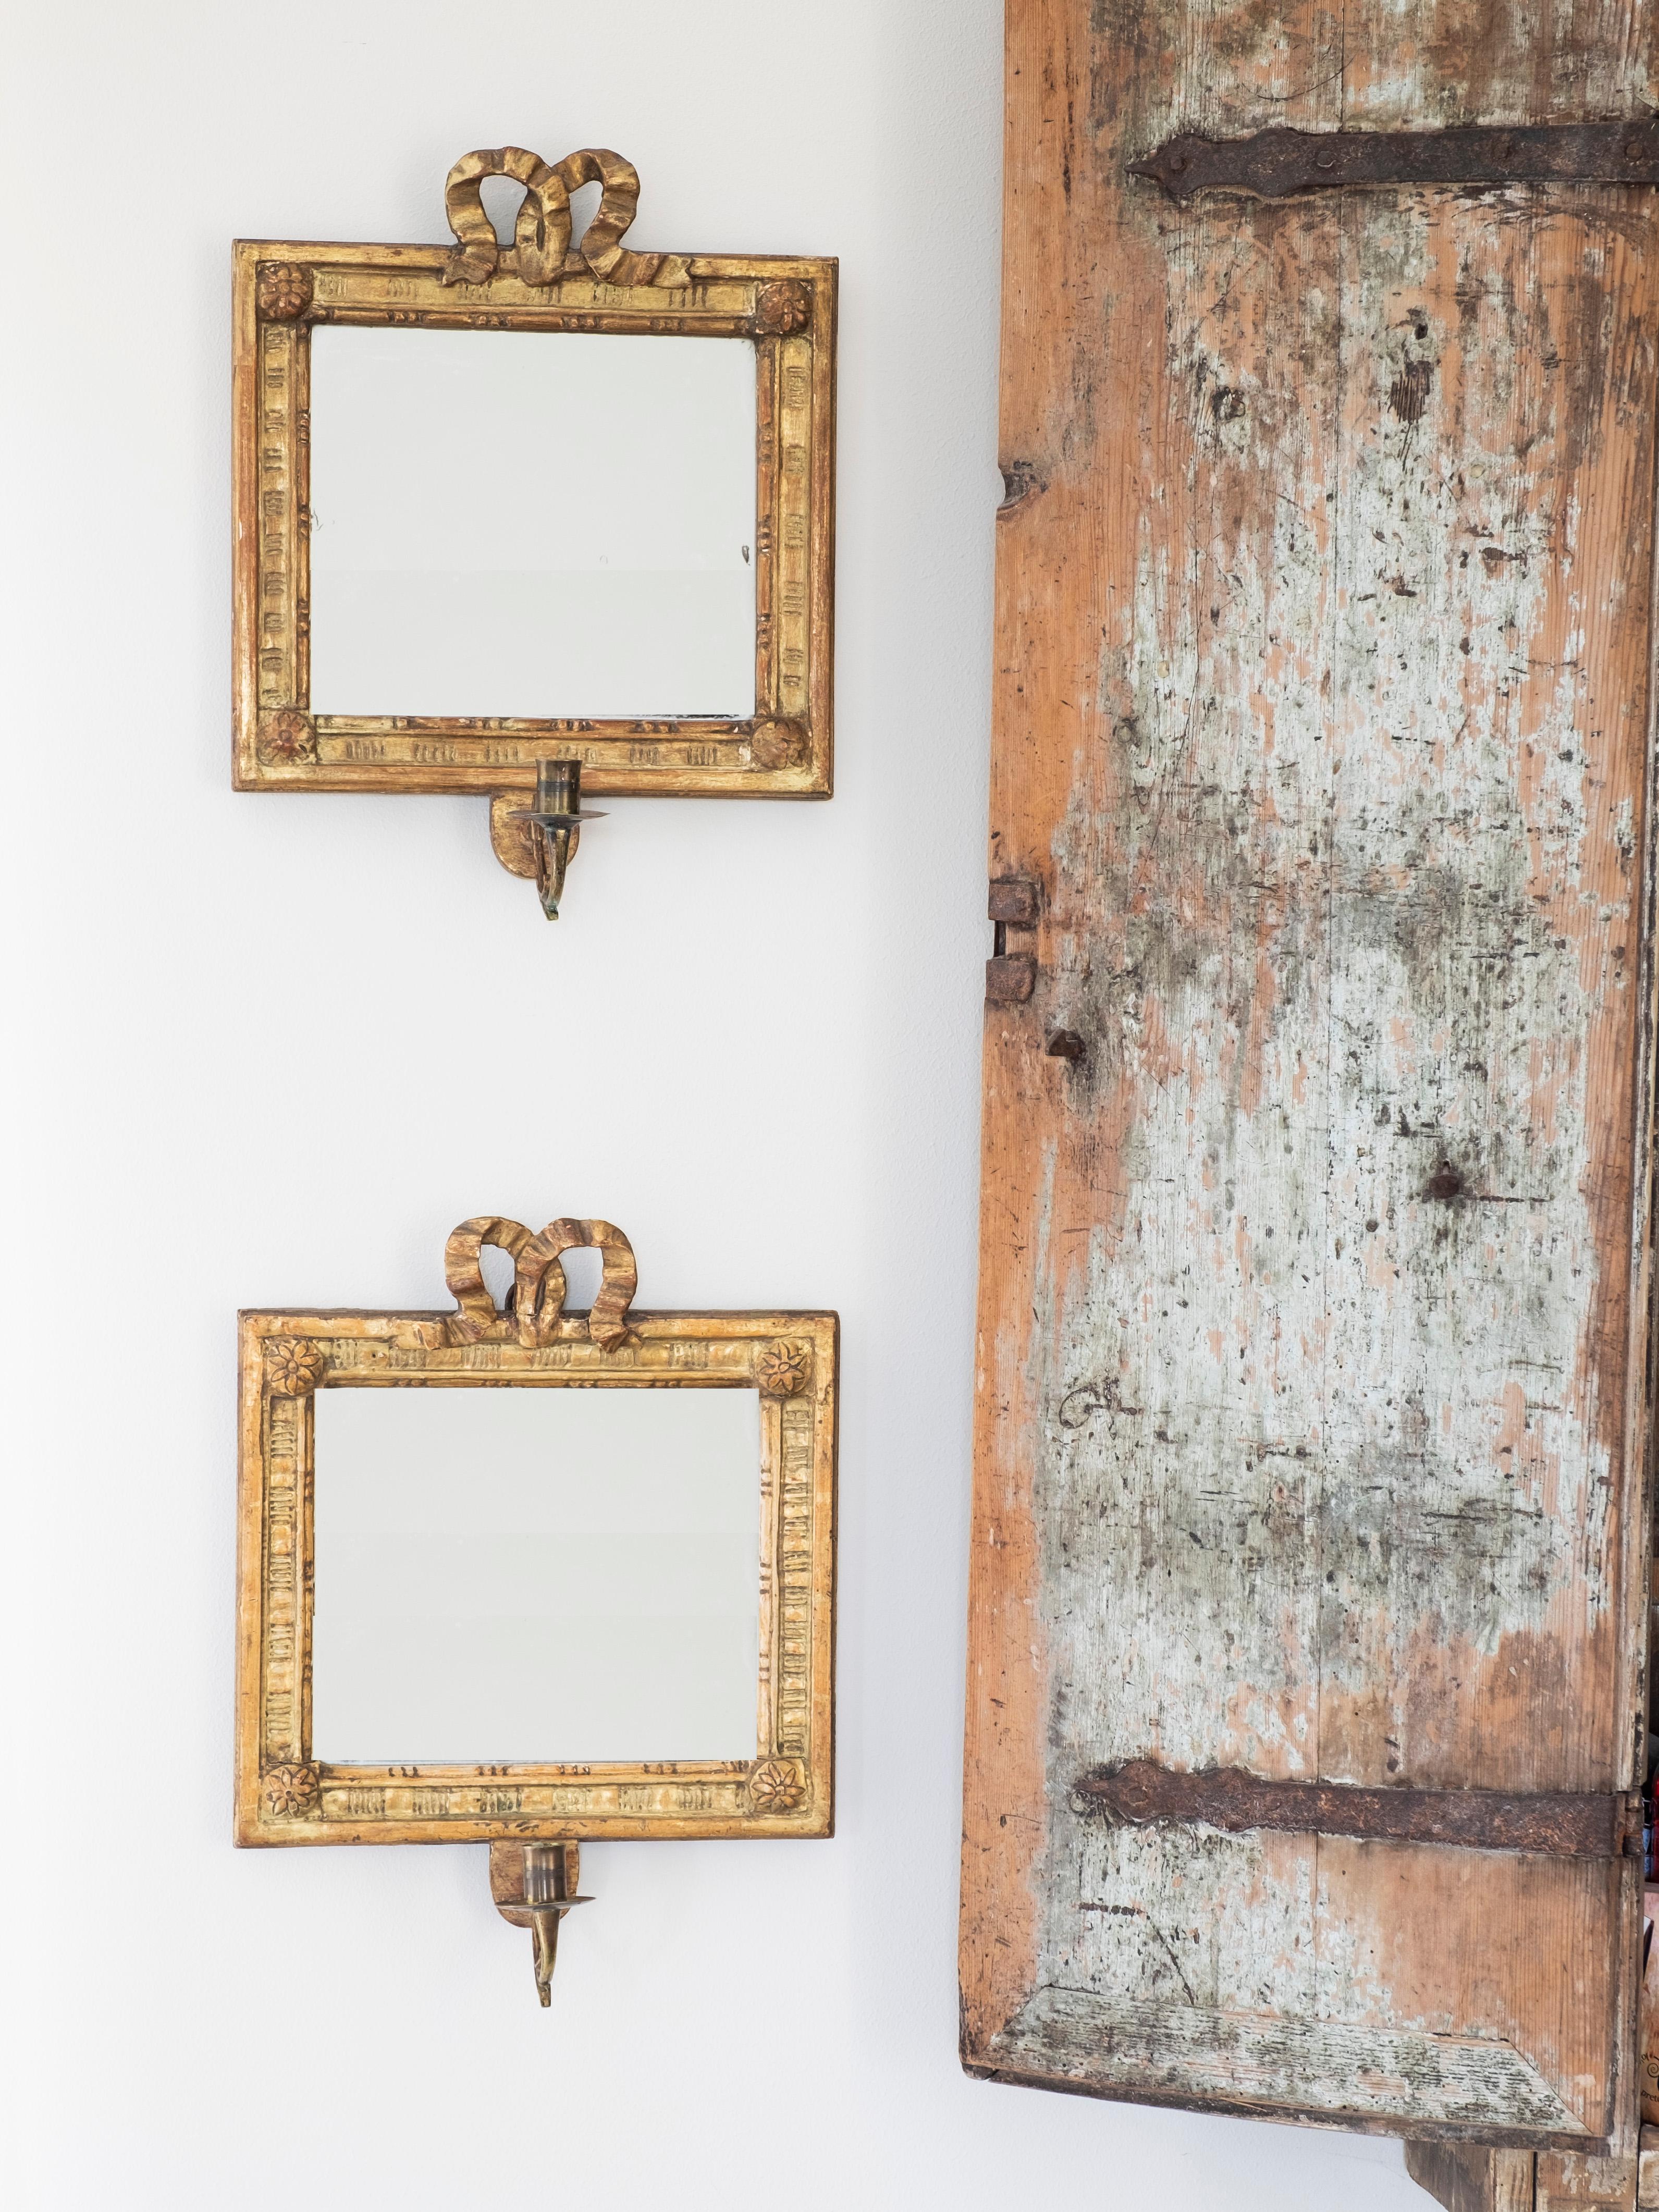 Fine pair of early 19th century Gustavian mirror sconces, circa 1810, Sweden.

Good original condition, wear consistent with age and use.